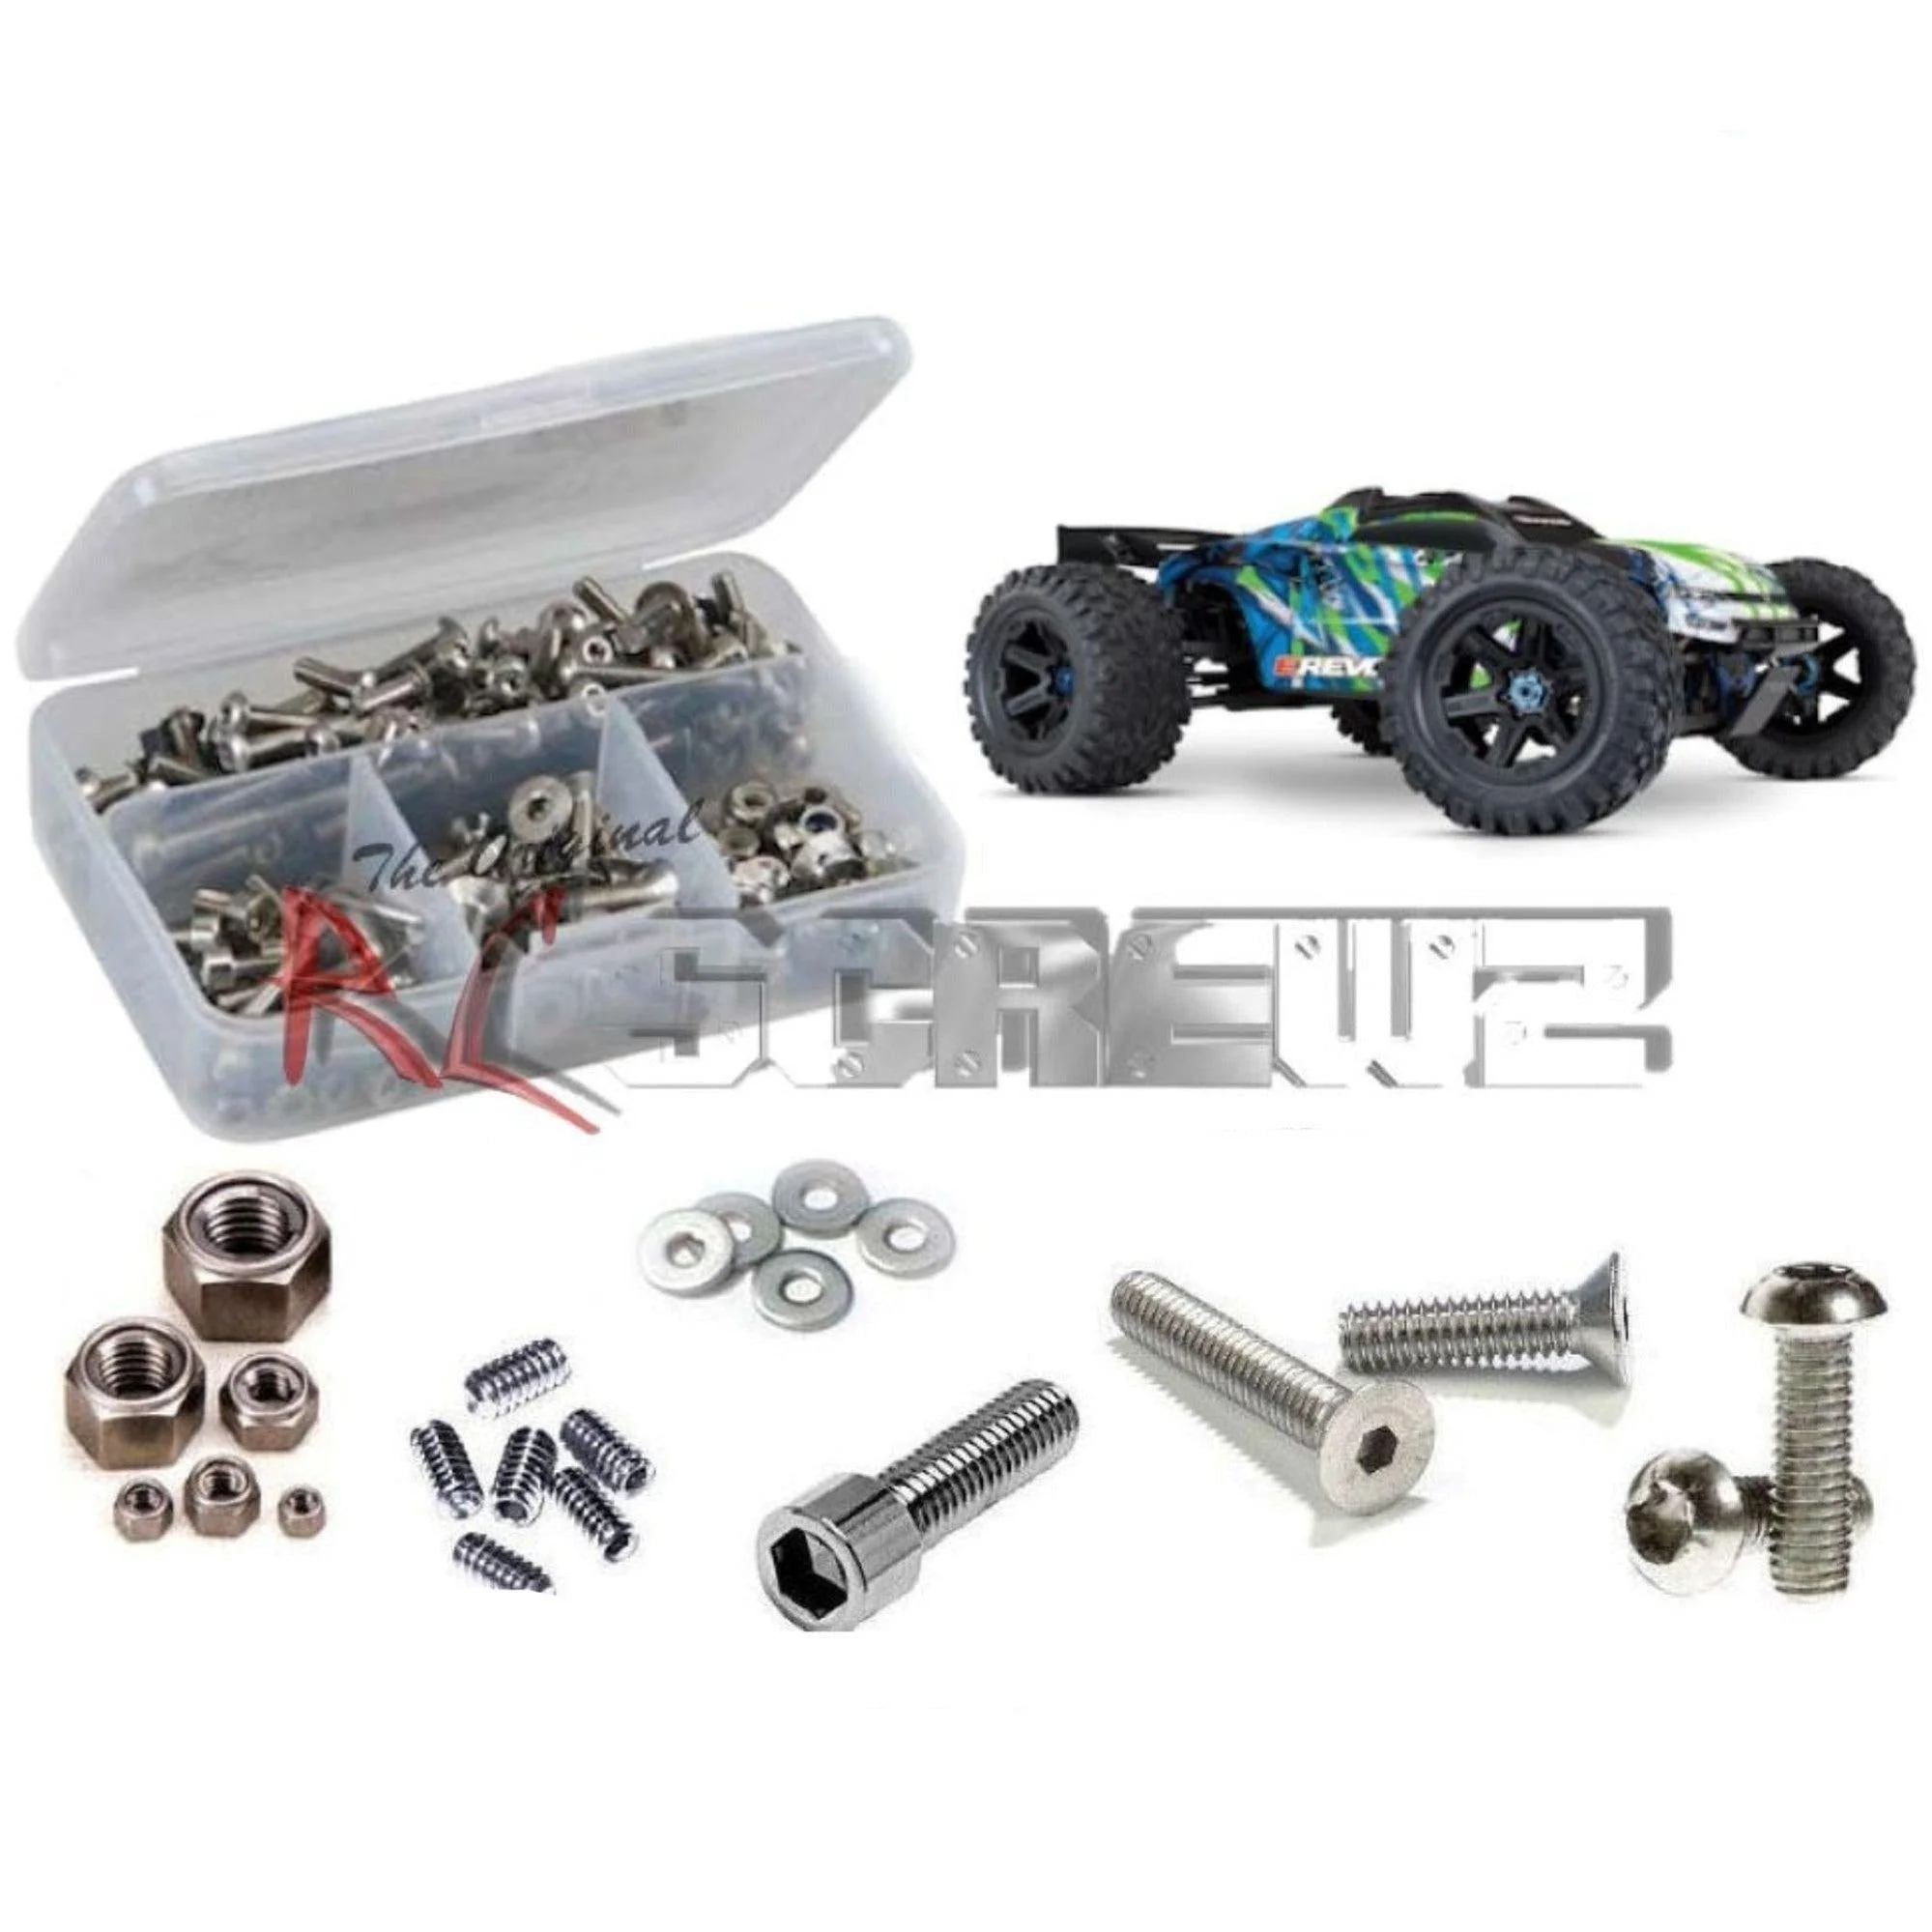 RCScrewZ Stainless Screw Kit tra082 for Traxxas E-Revo VXL 2.0 4WD (#86086-4) MT - Picture 1 of 12